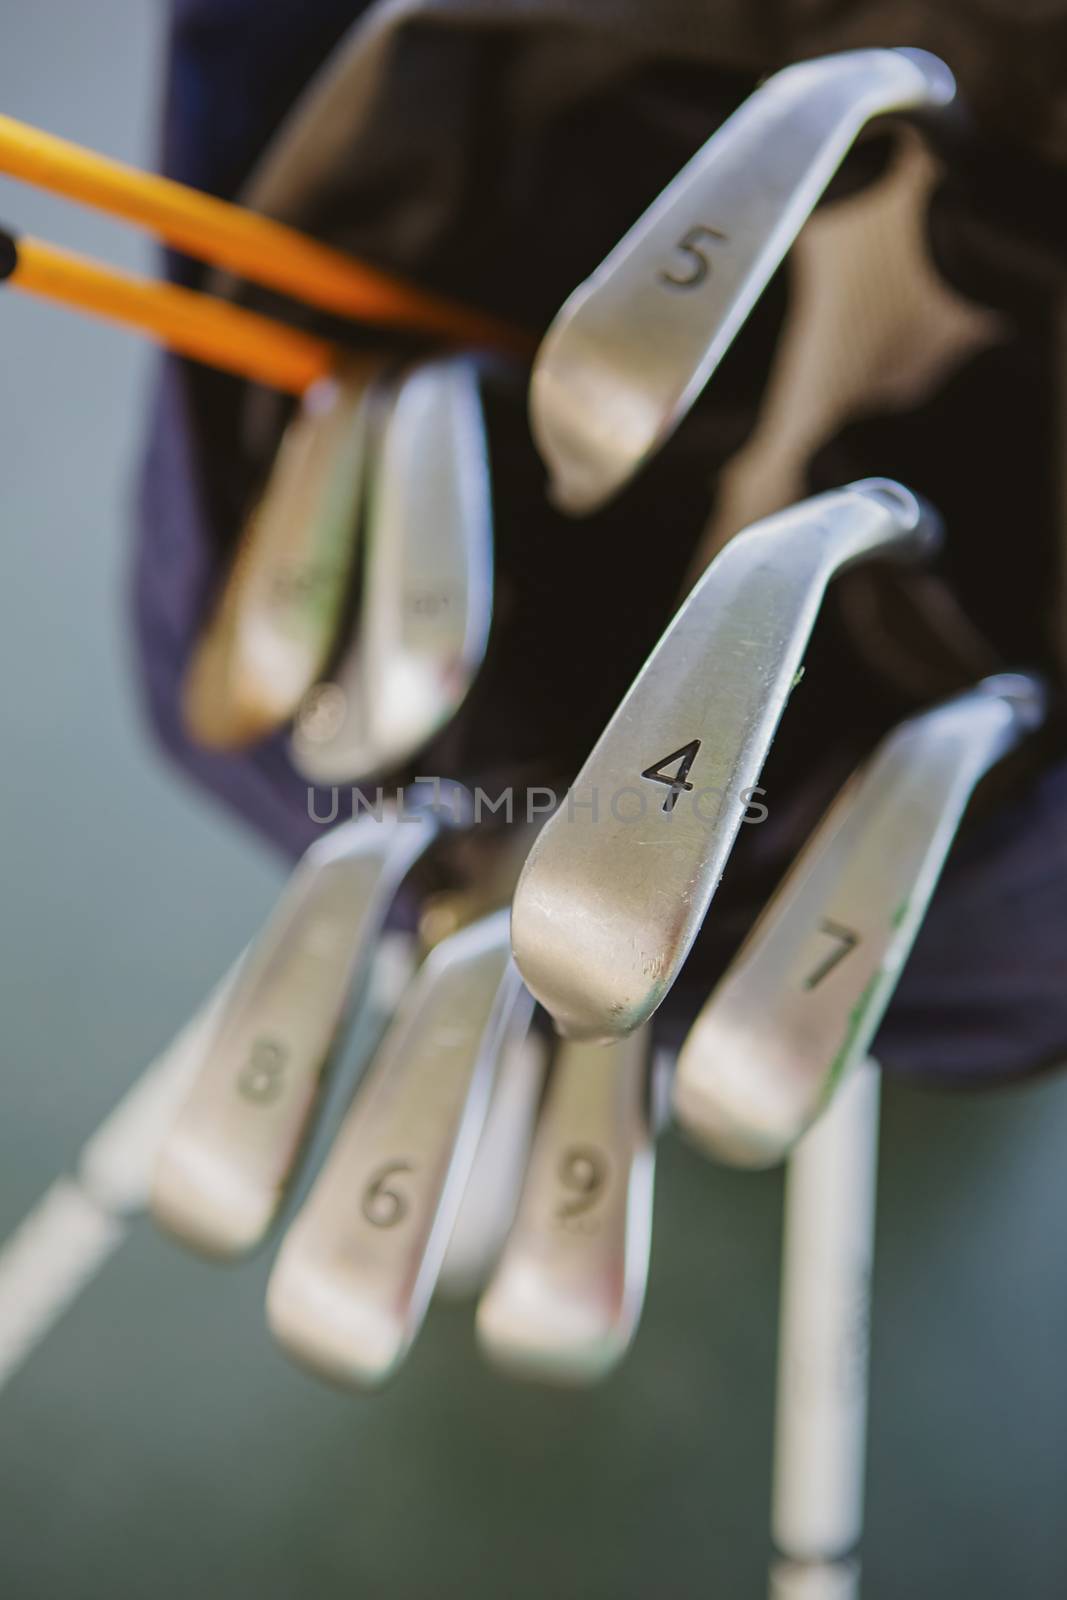 Dirty golf clubs in bag. Shallow dof